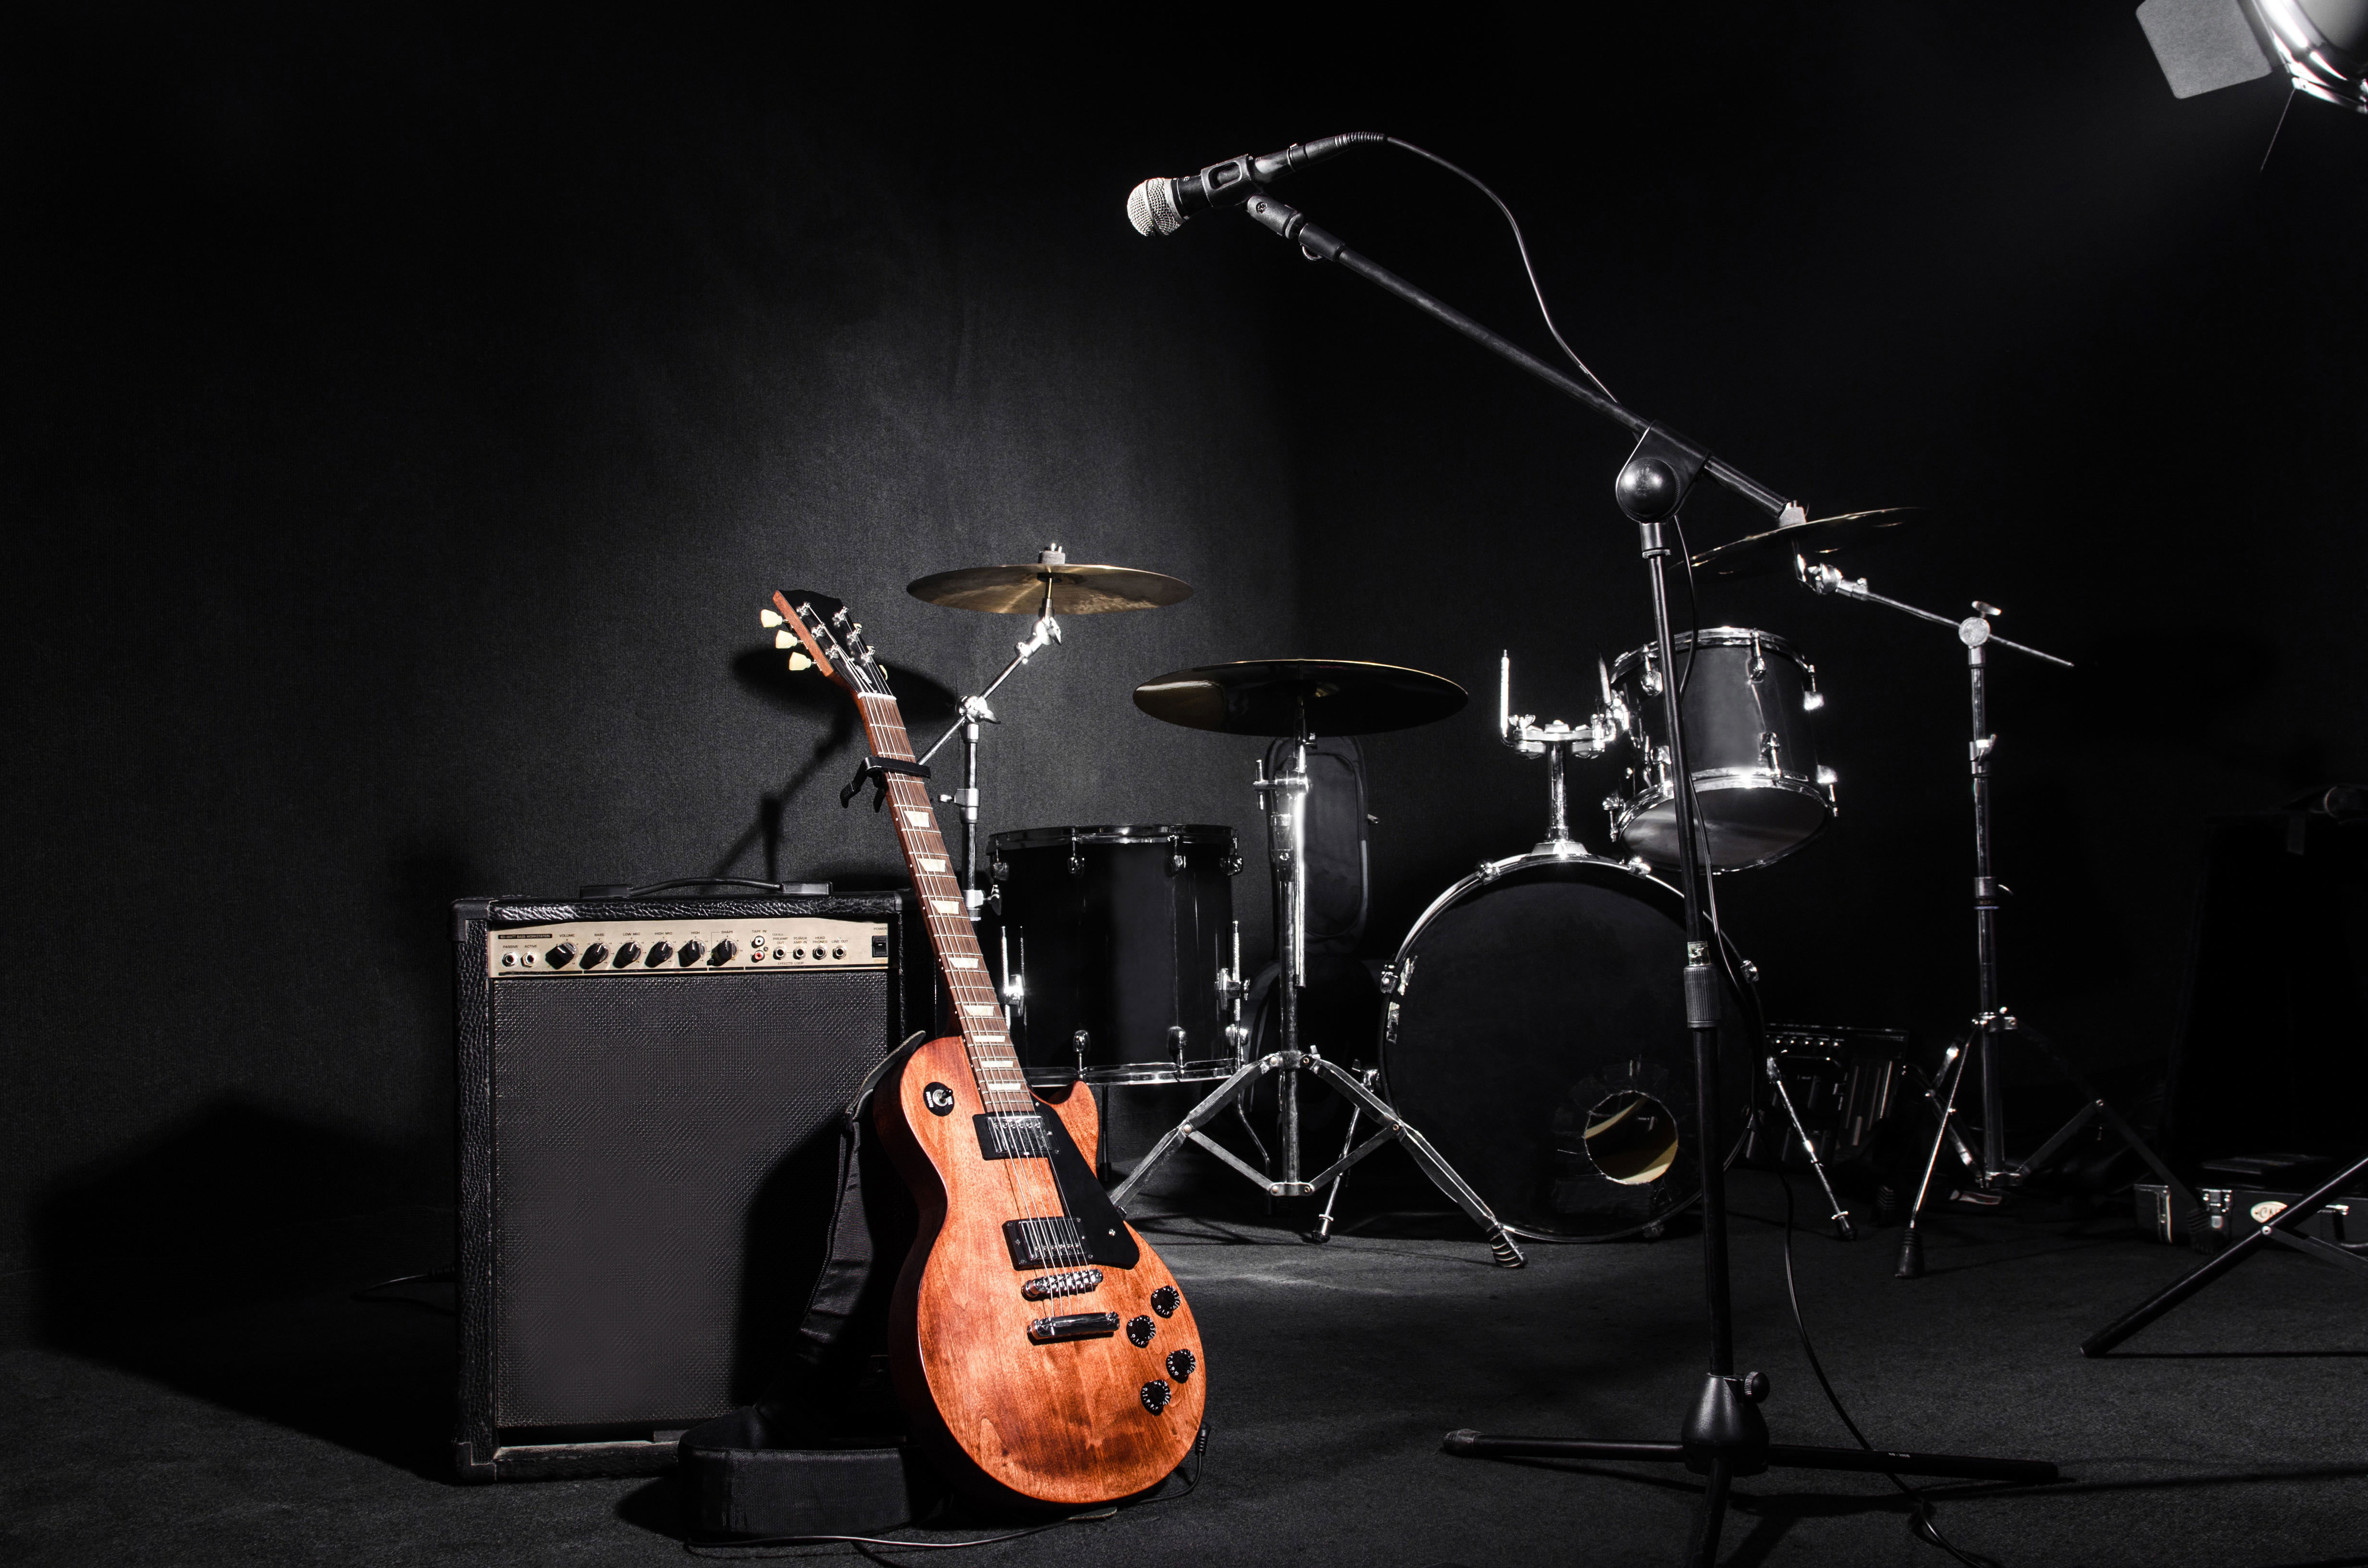 Drum Set Background Images HD Pictures and Wallpaper For Free Download   Pngtree